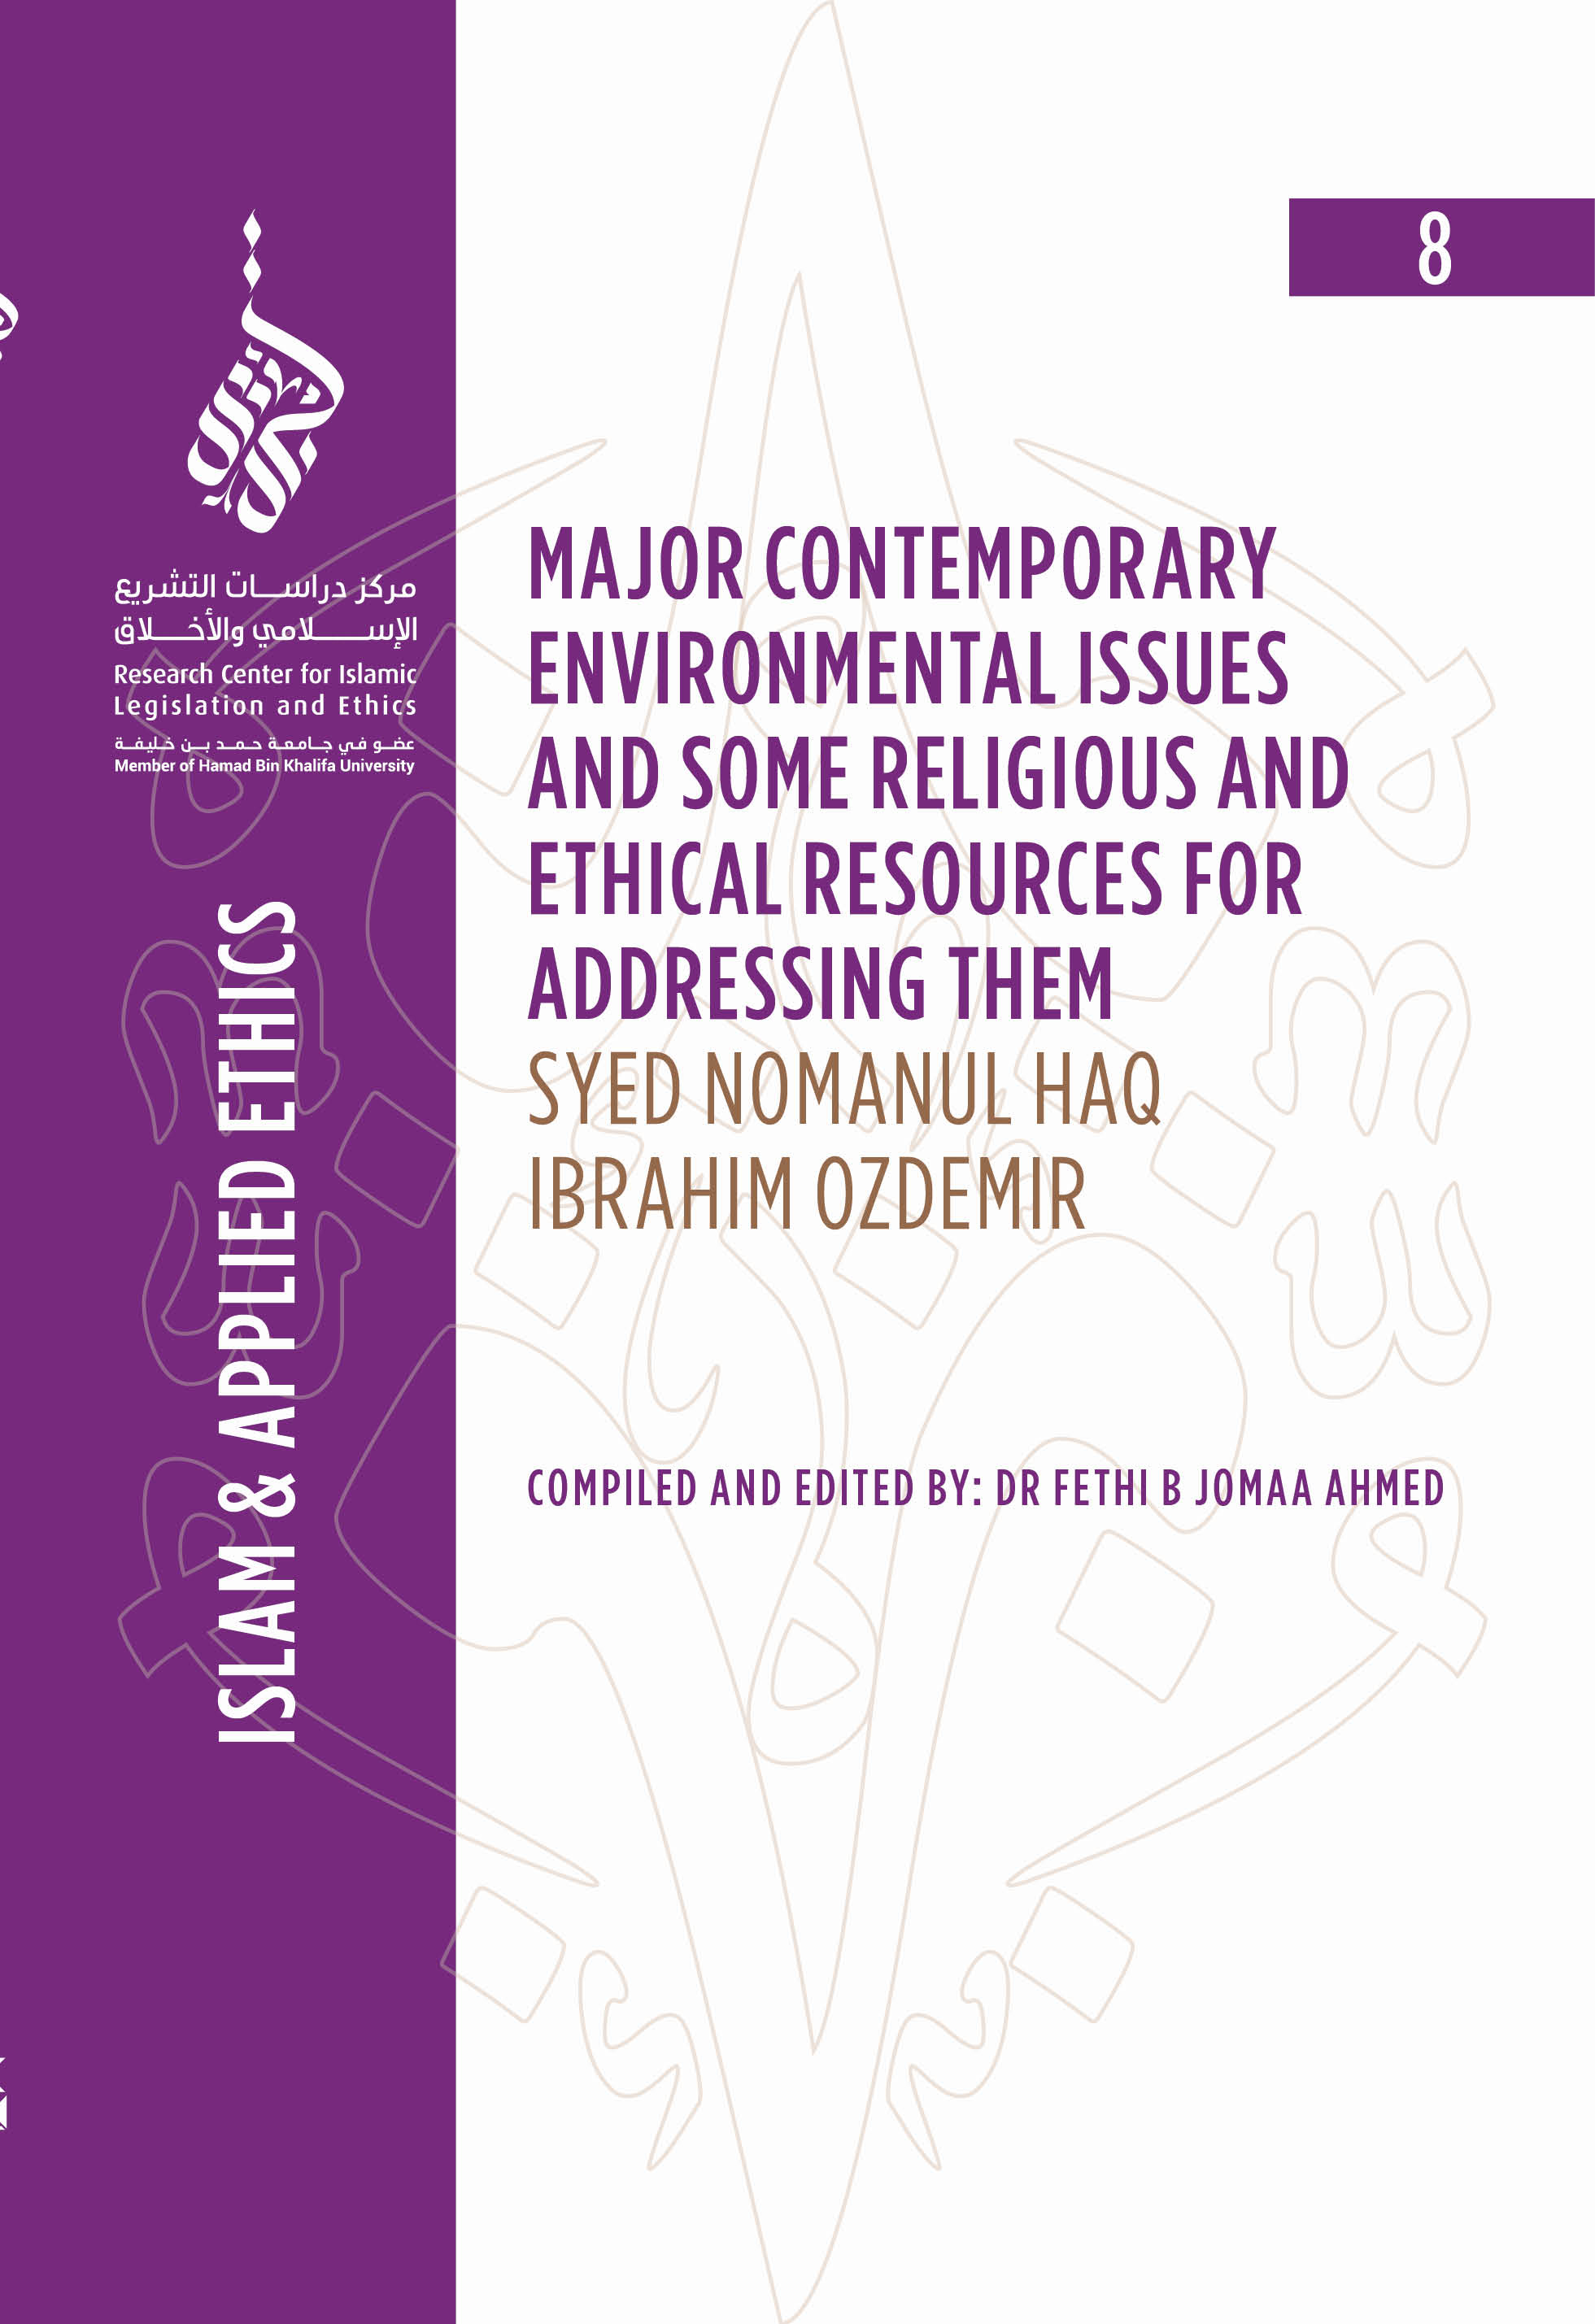 Major Contemporary Environmental Issues and Some Religious and Ethical Resources for Addressing Them